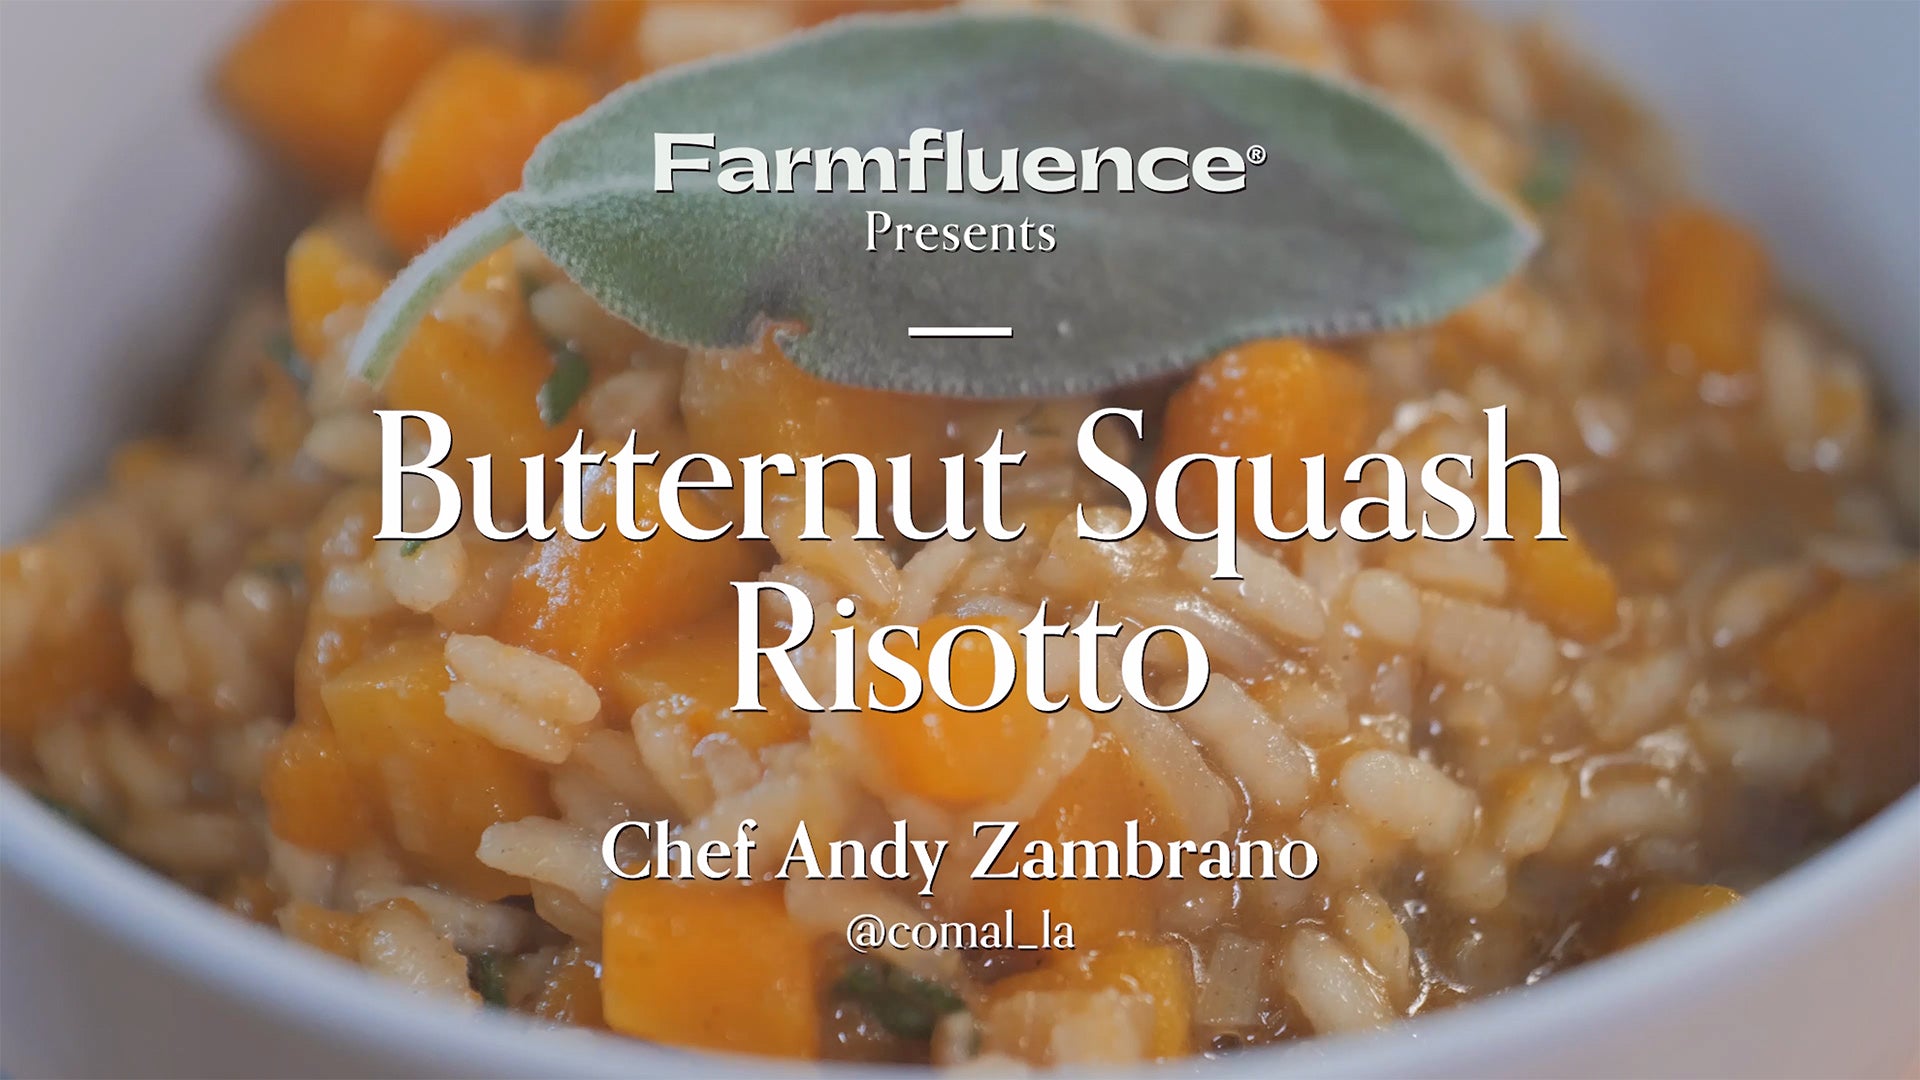 How to Make Butternut Squash Risotto